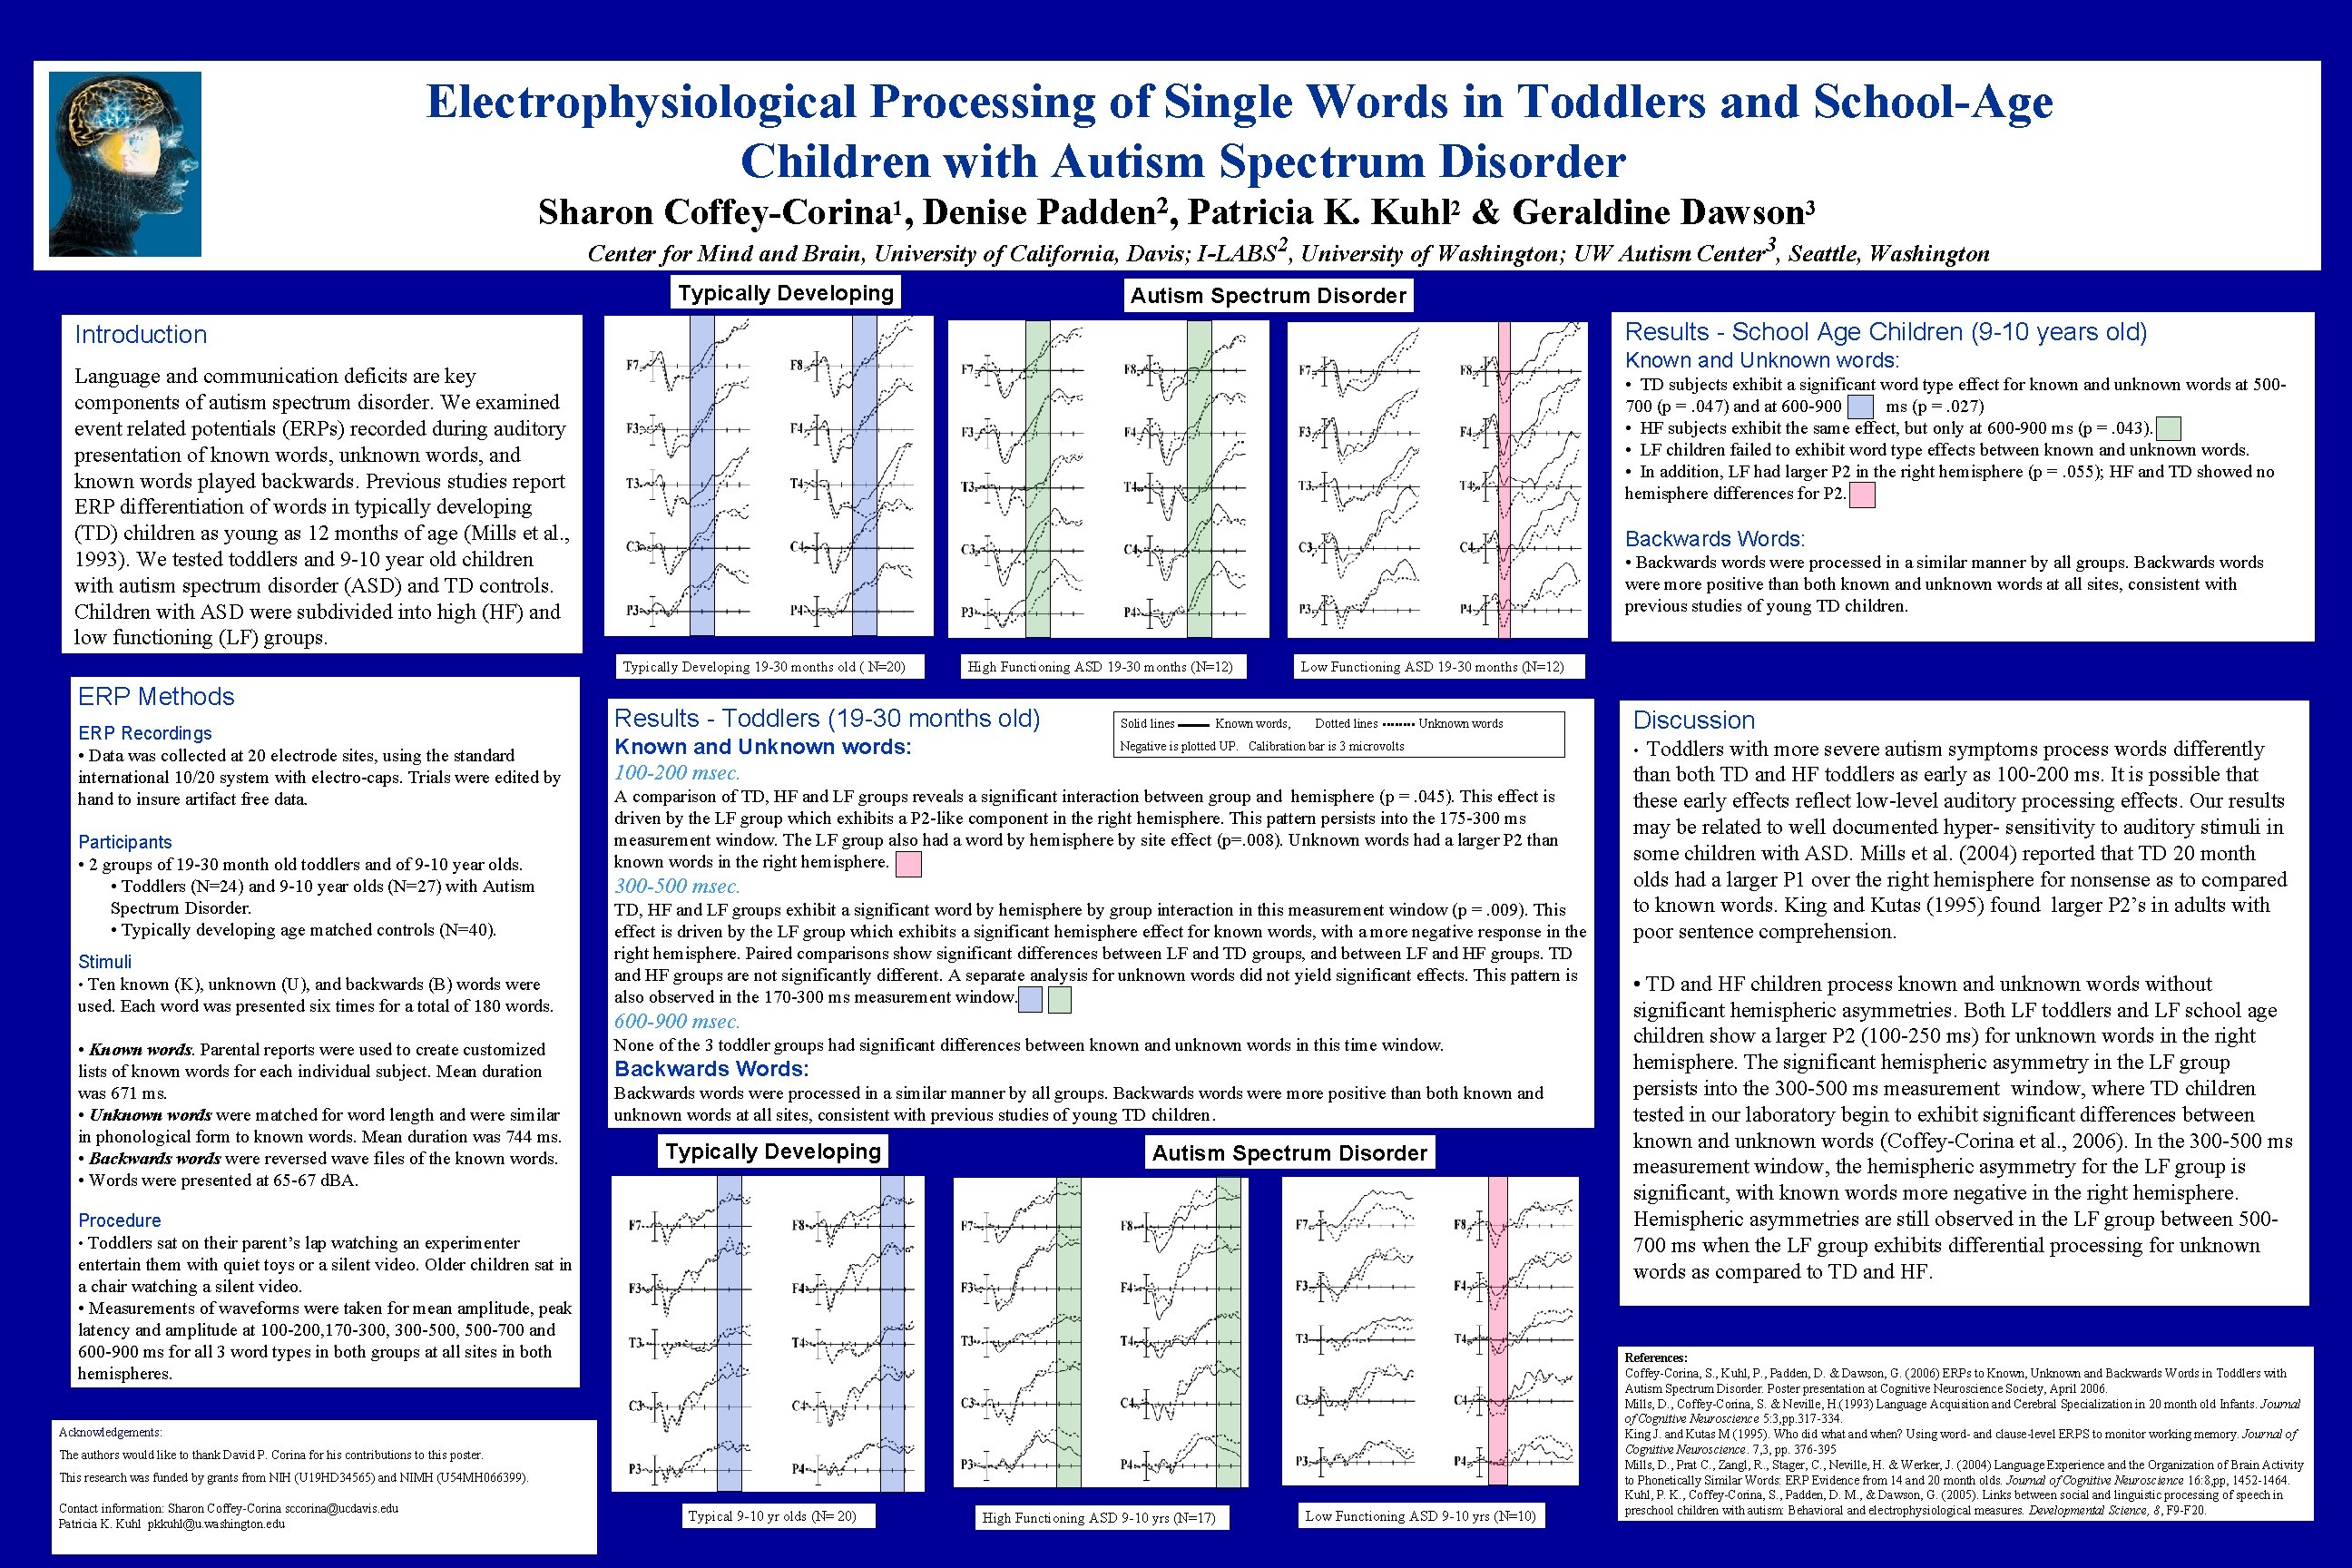 Electrophysiological Processing of Single Words in Toddlers and School-Age Children with Autism Spectrum Disorder